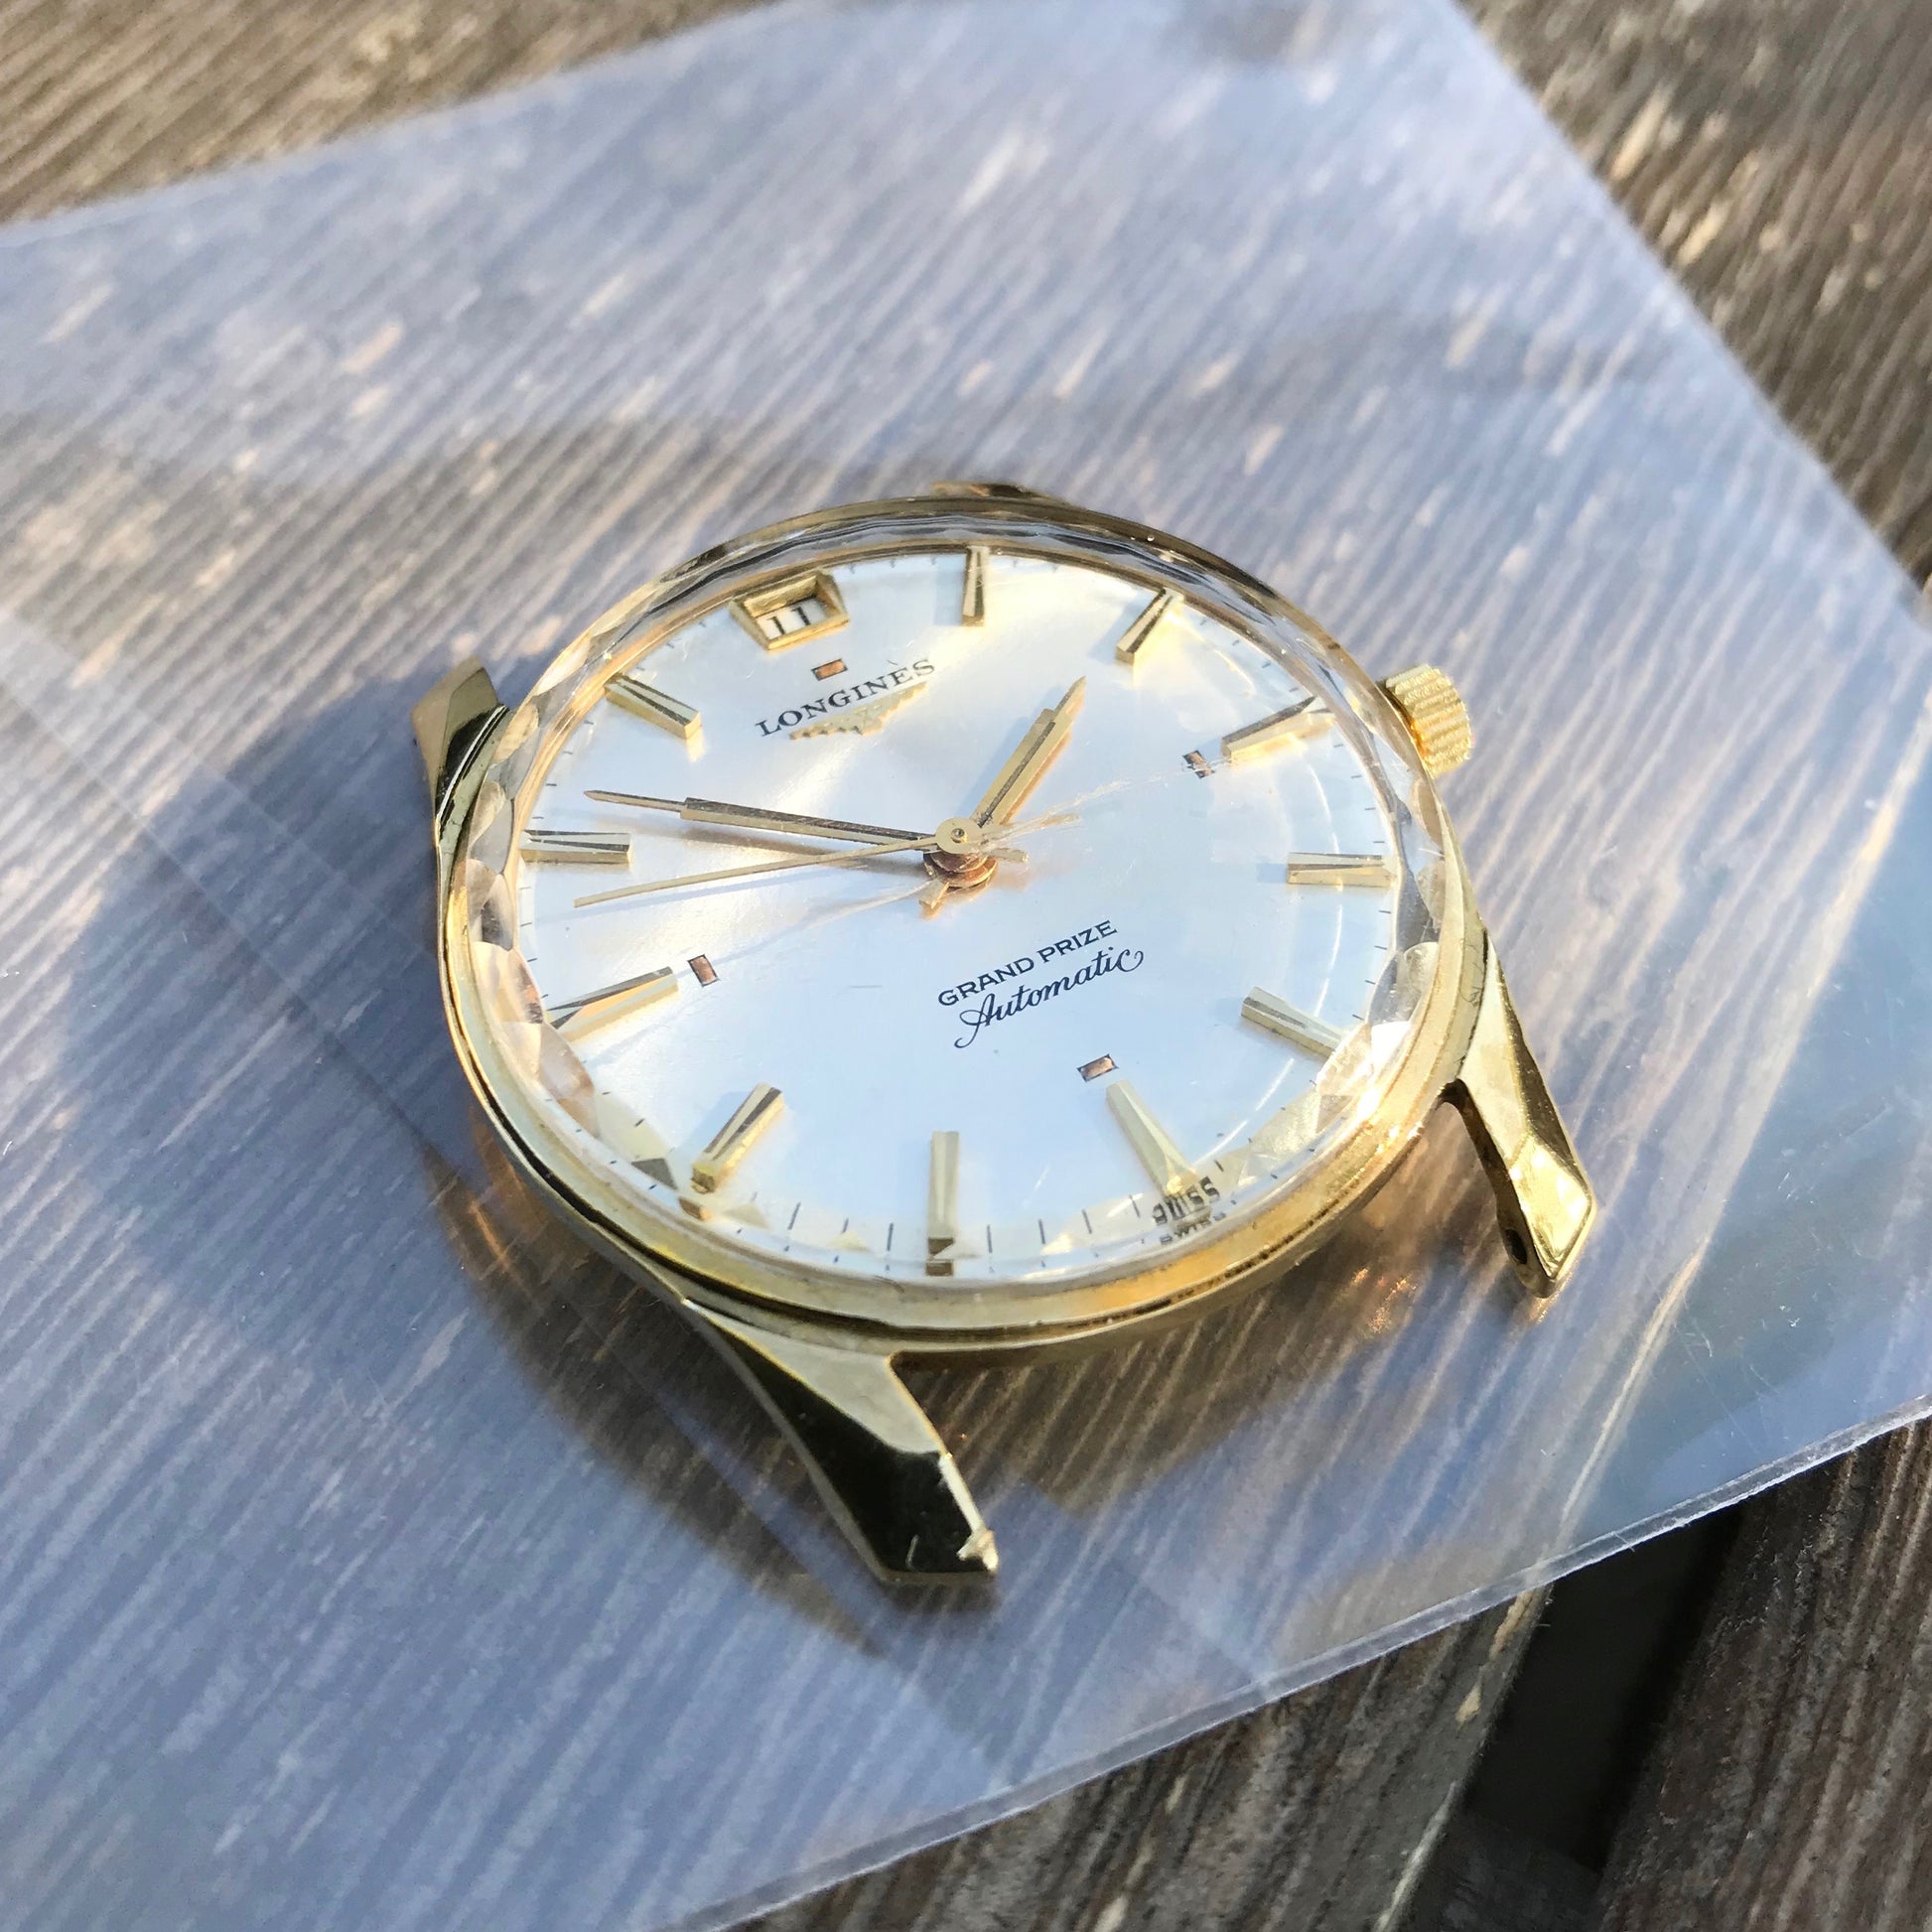 Vintage Longines Grand Prize Automatic 18K Yellow Gold Silver Date Wristwatch - Hashtag Watch Company